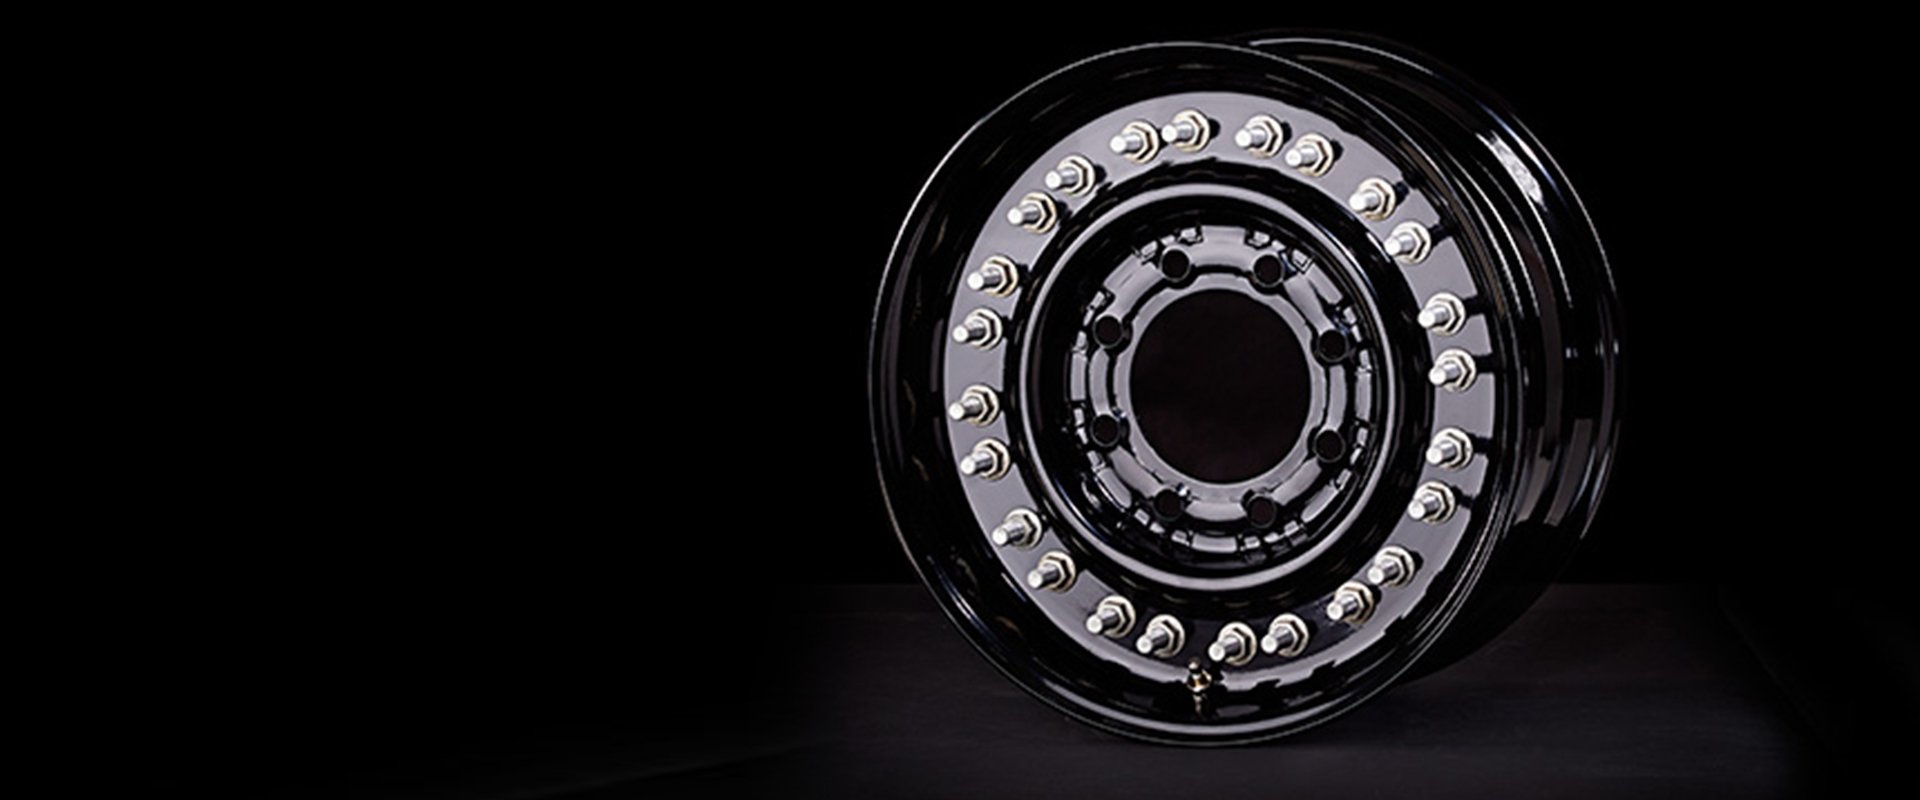 A Specialty Wheel for Military Vehicles by Maxion Wheels.